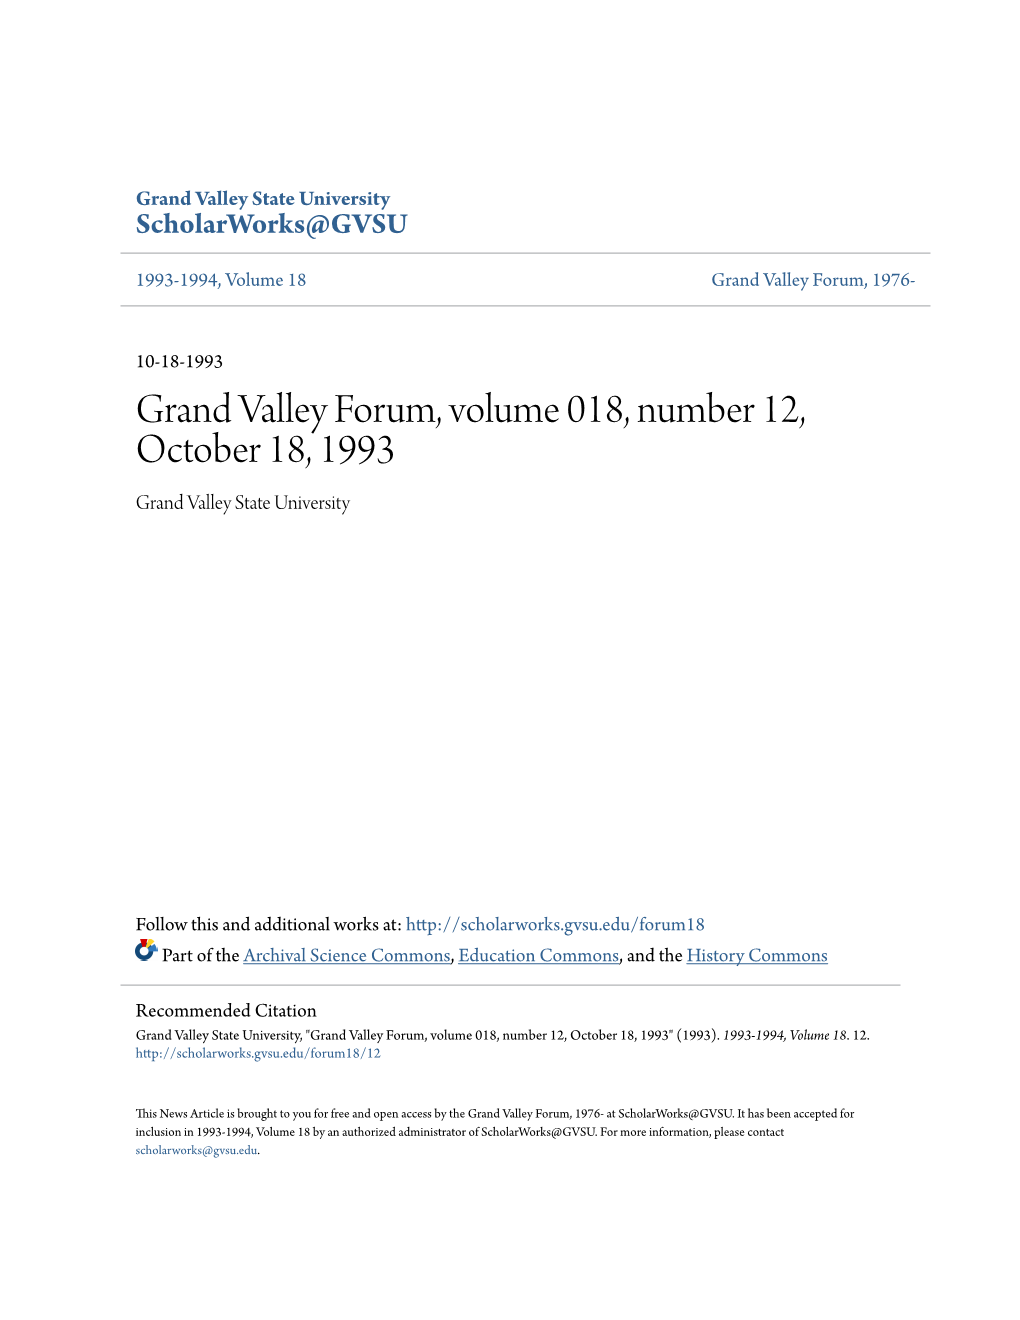 Grand Valley Forum, Volume 018, Number 12, October 18, 1993 Grand Valley State University